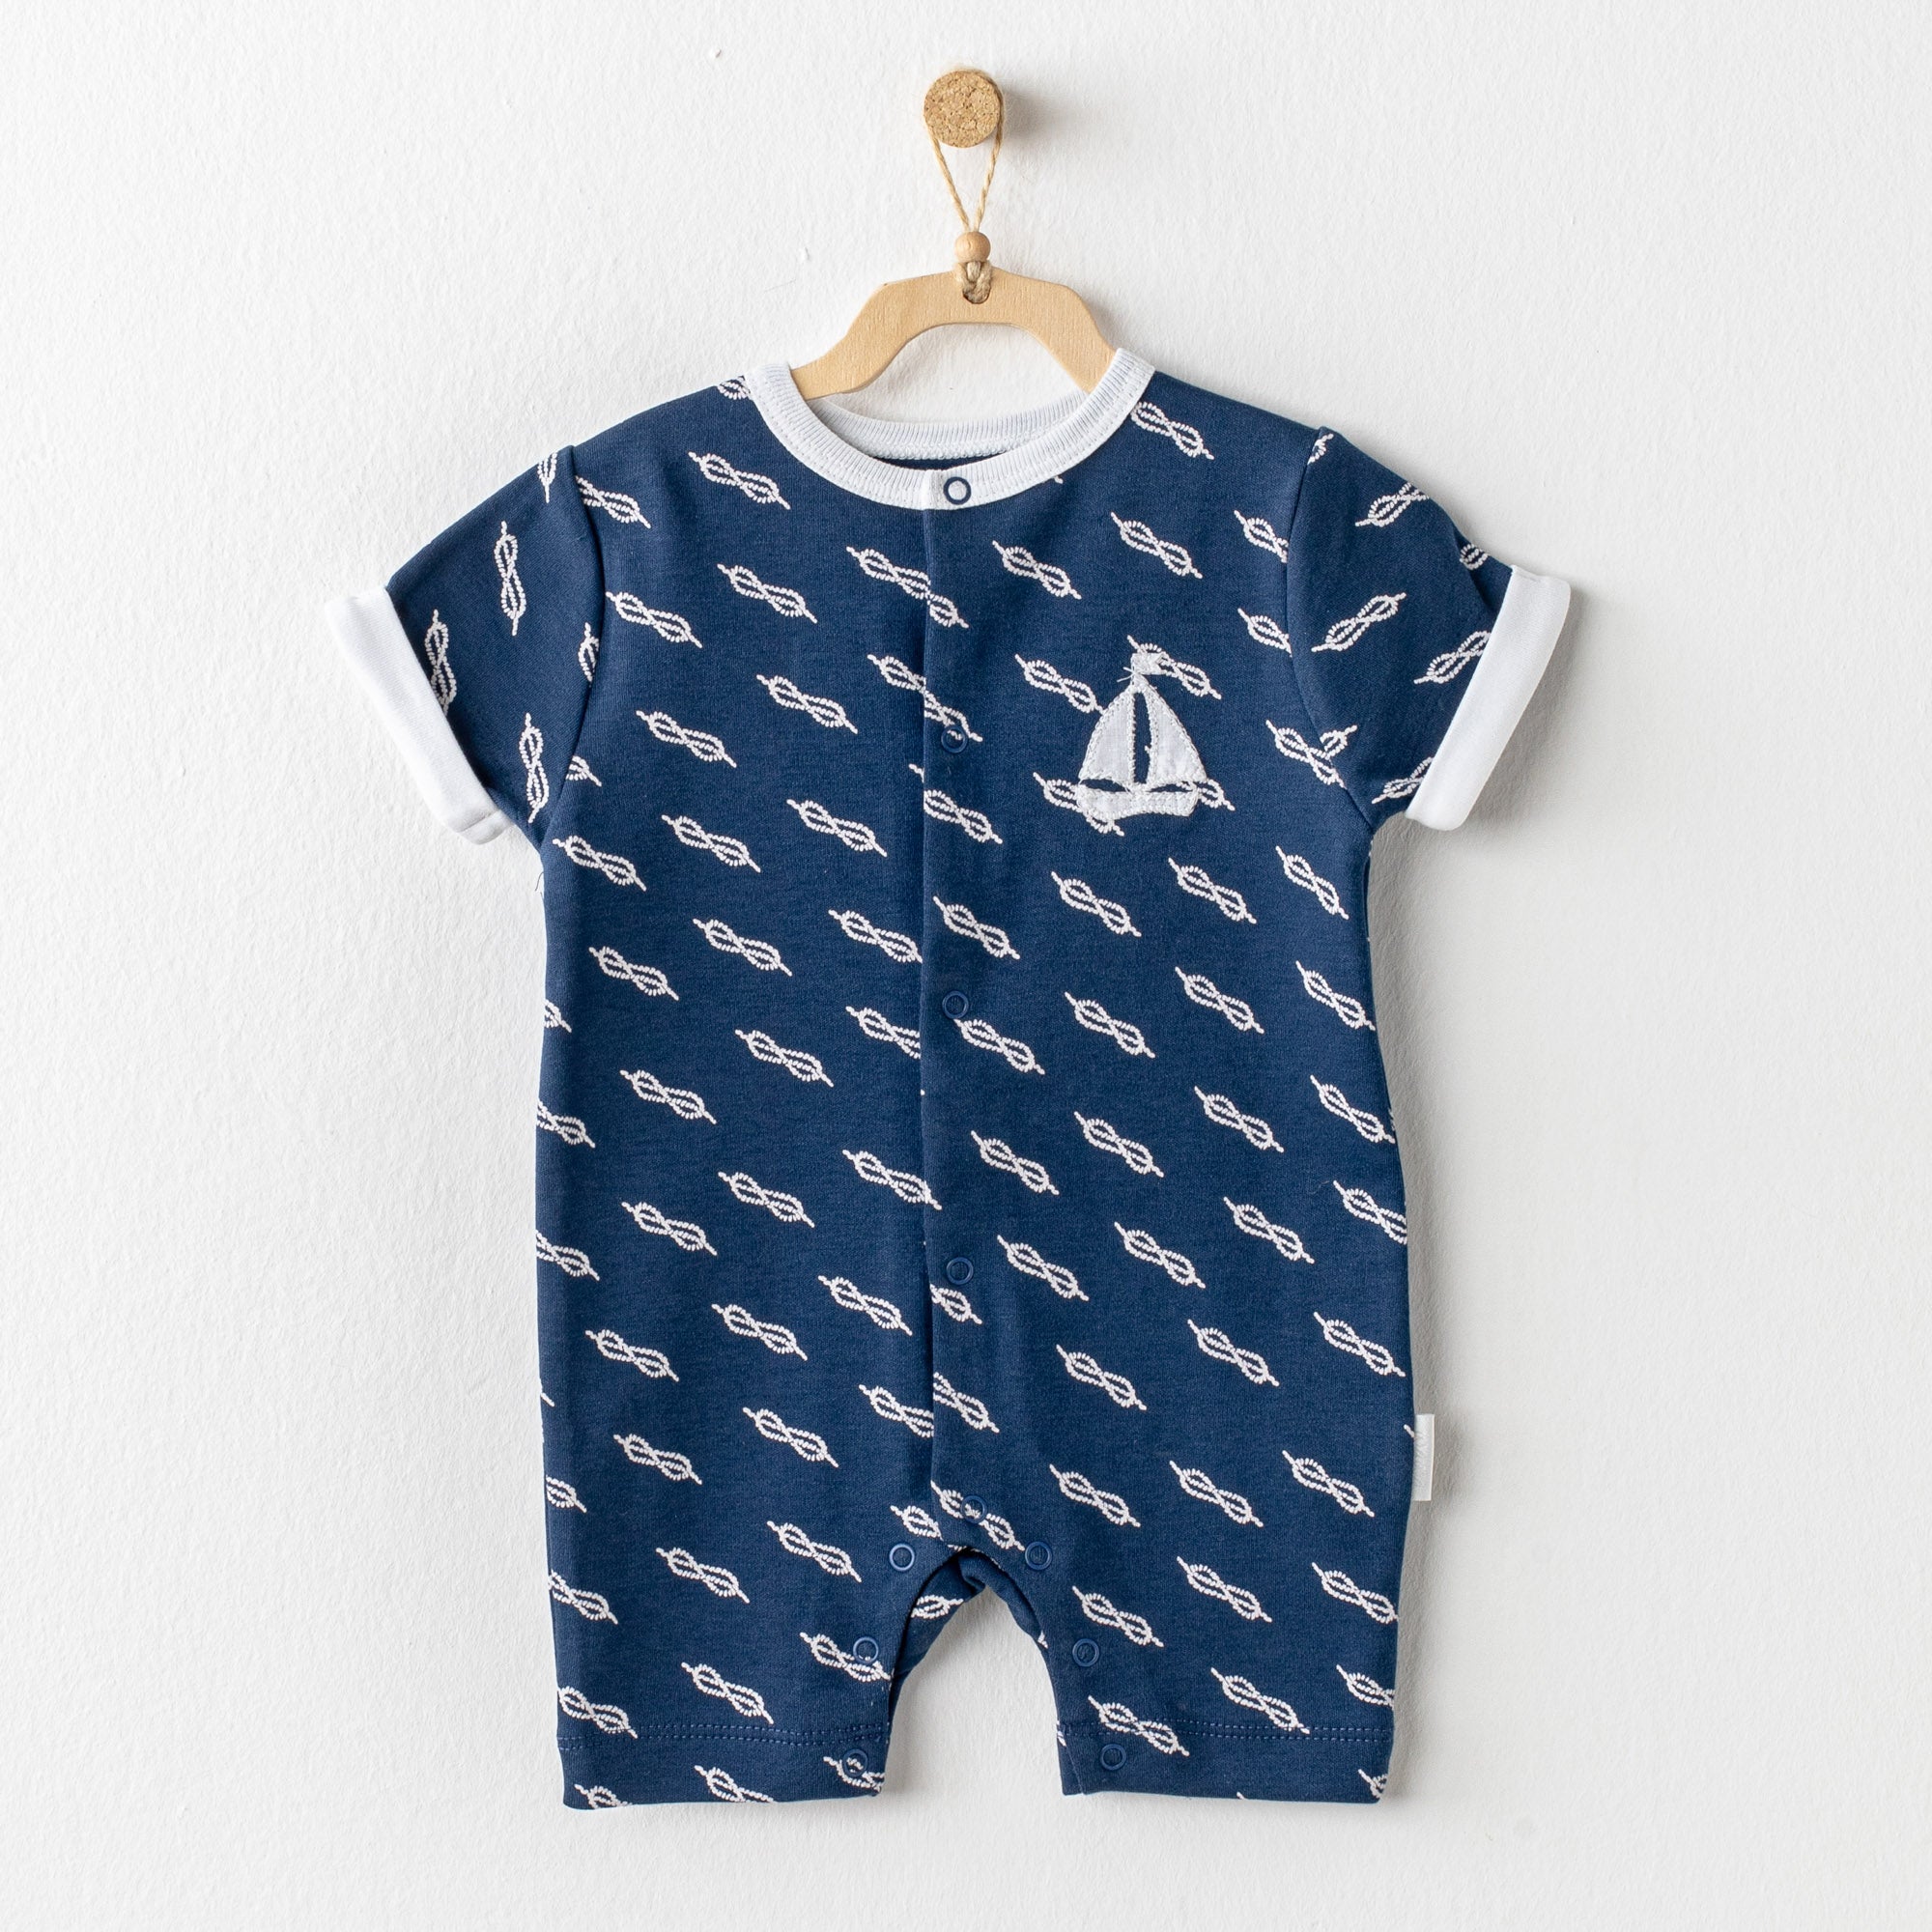 Baby Sailor Cotton Blue Romper - Baby Sailor Cotton Blue Romper - 1-3 Months - Andywawa - Melymod